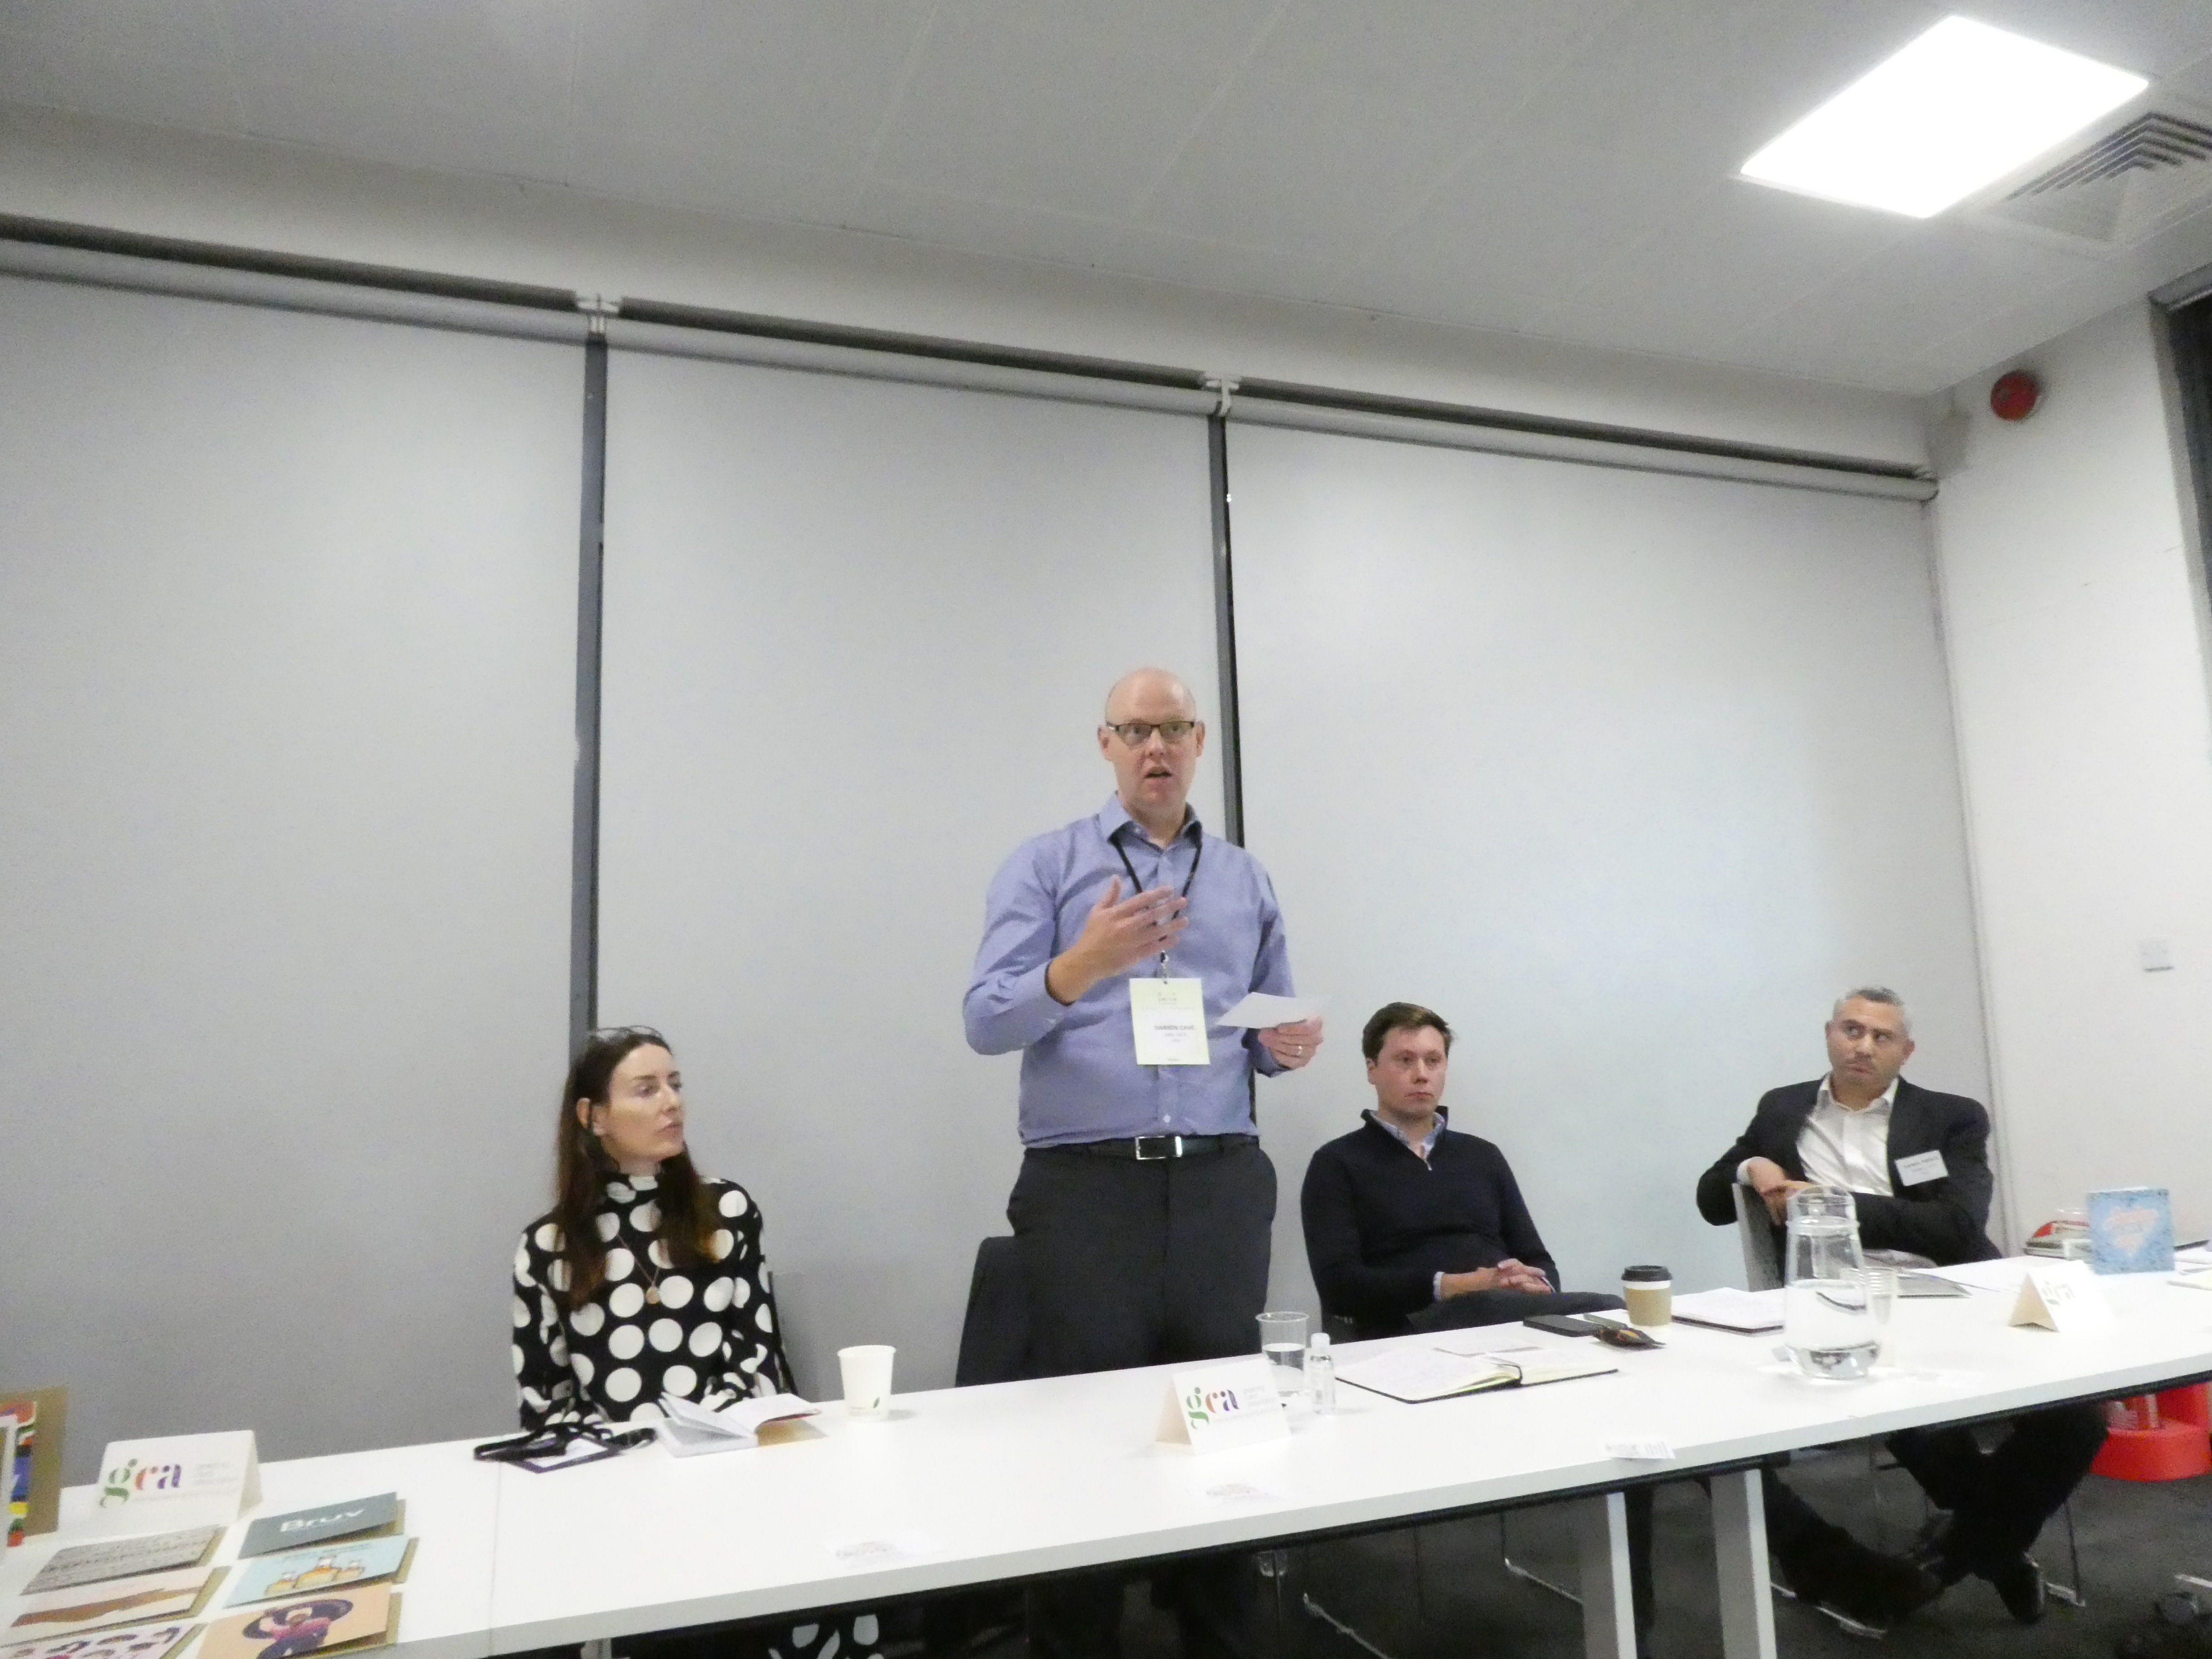 Above: While half the publishers were in the ‘den’ the other half were able to listen to talks from GCA Council Members Rachel Hare (Belly Button), (second left) Darren Cave (UK Greetings) and (far right) Daniel Prince (Danilo) as well as from Briffa’s Will Miles.